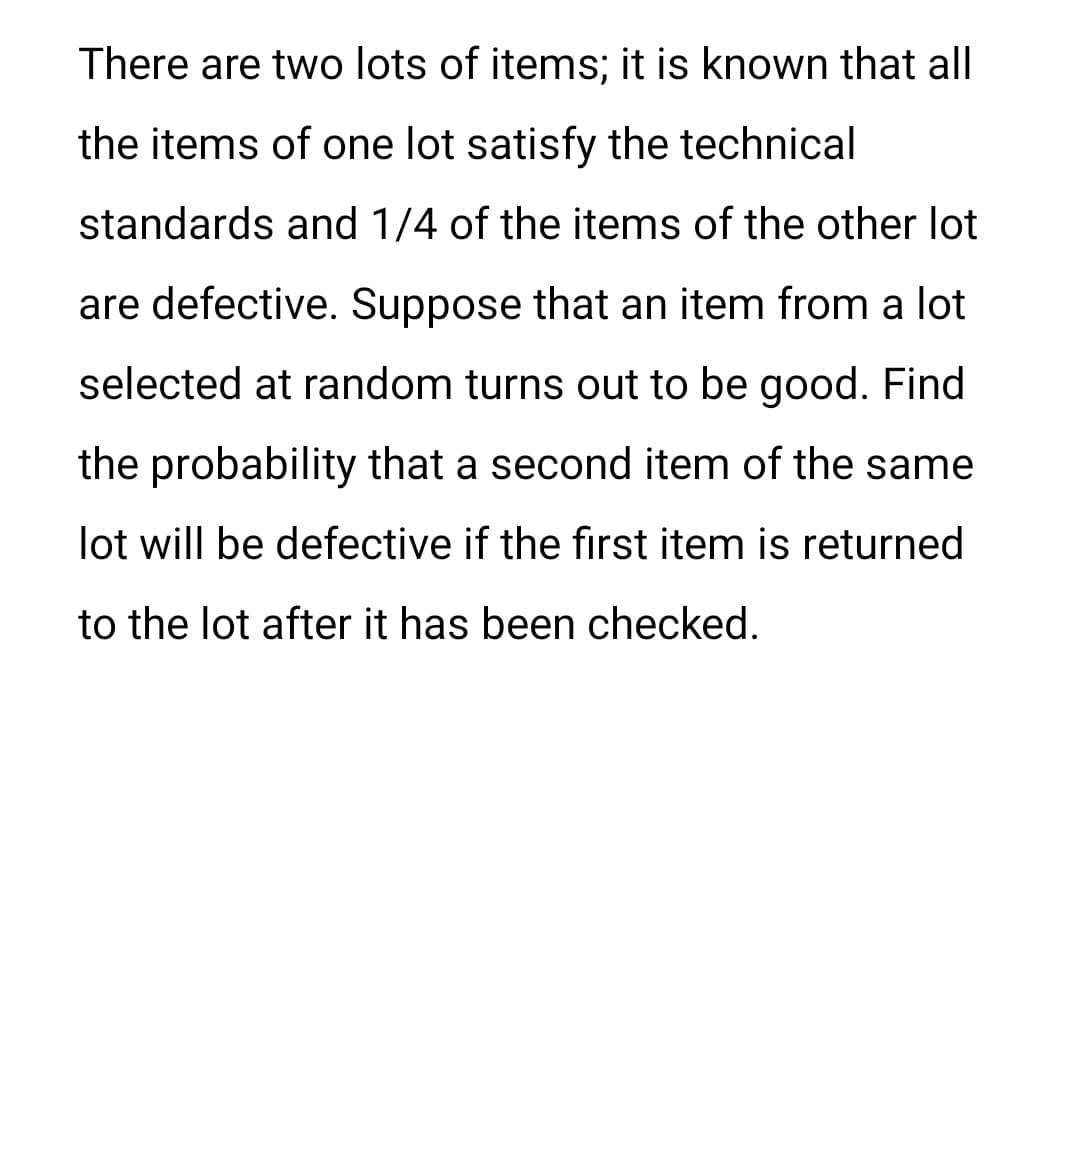 There are two lots of items; it is known that all
the items of one lot satisfy the technical
standards and 1/4 of the items of the other lot
are defective. Suppose that an item from a lot
selected at random turns out to be good. Find
the probability that a second item of the same
lot will be defective if the first item is returned
to the lot after it has been checked.